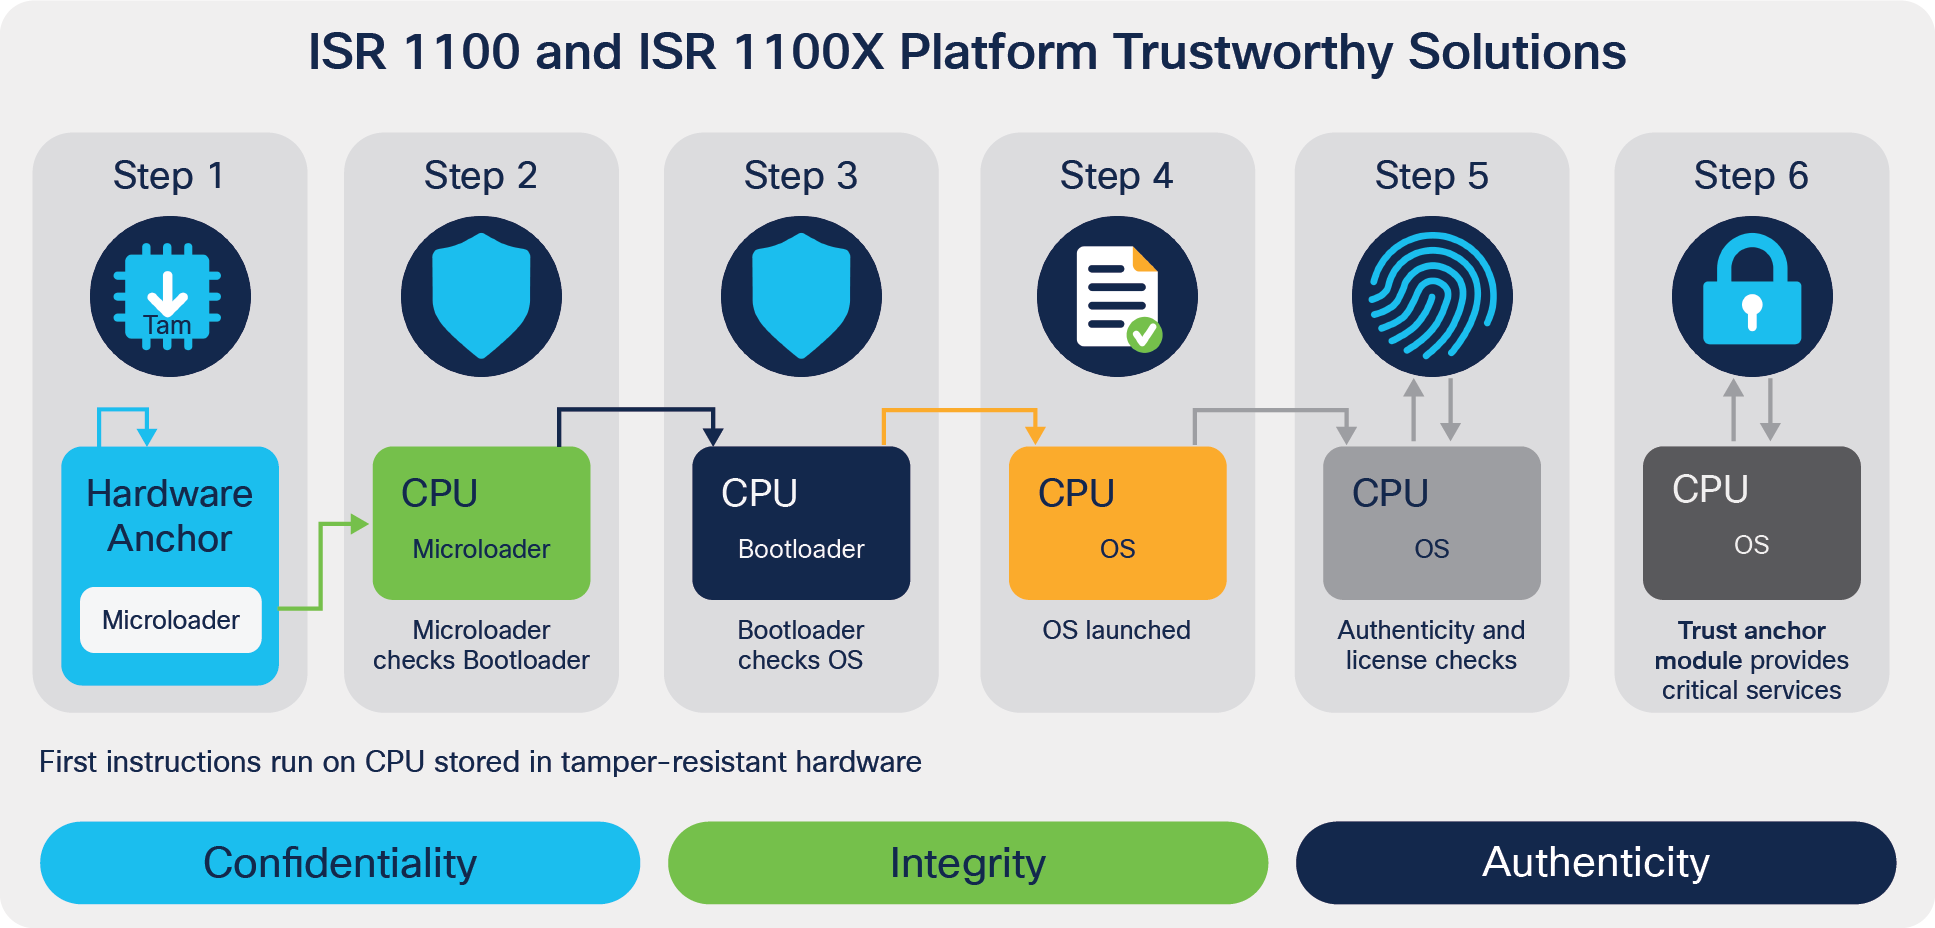 Components of Cisco Trustworthy Solutions